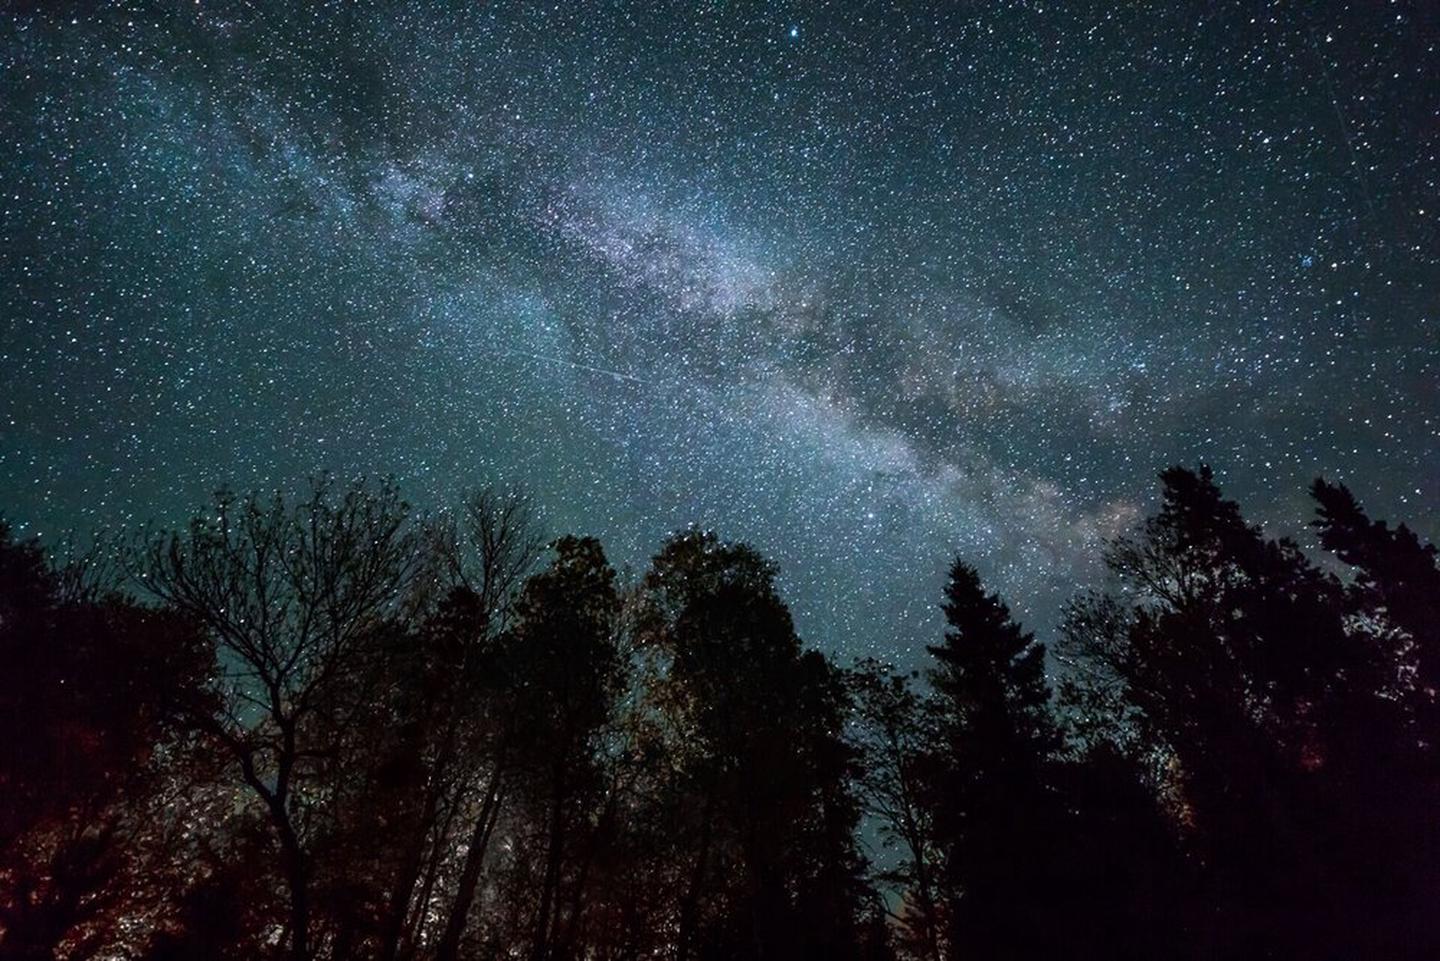 The Milky Way Galaxy stretches across the dark night sky at Voyageurs